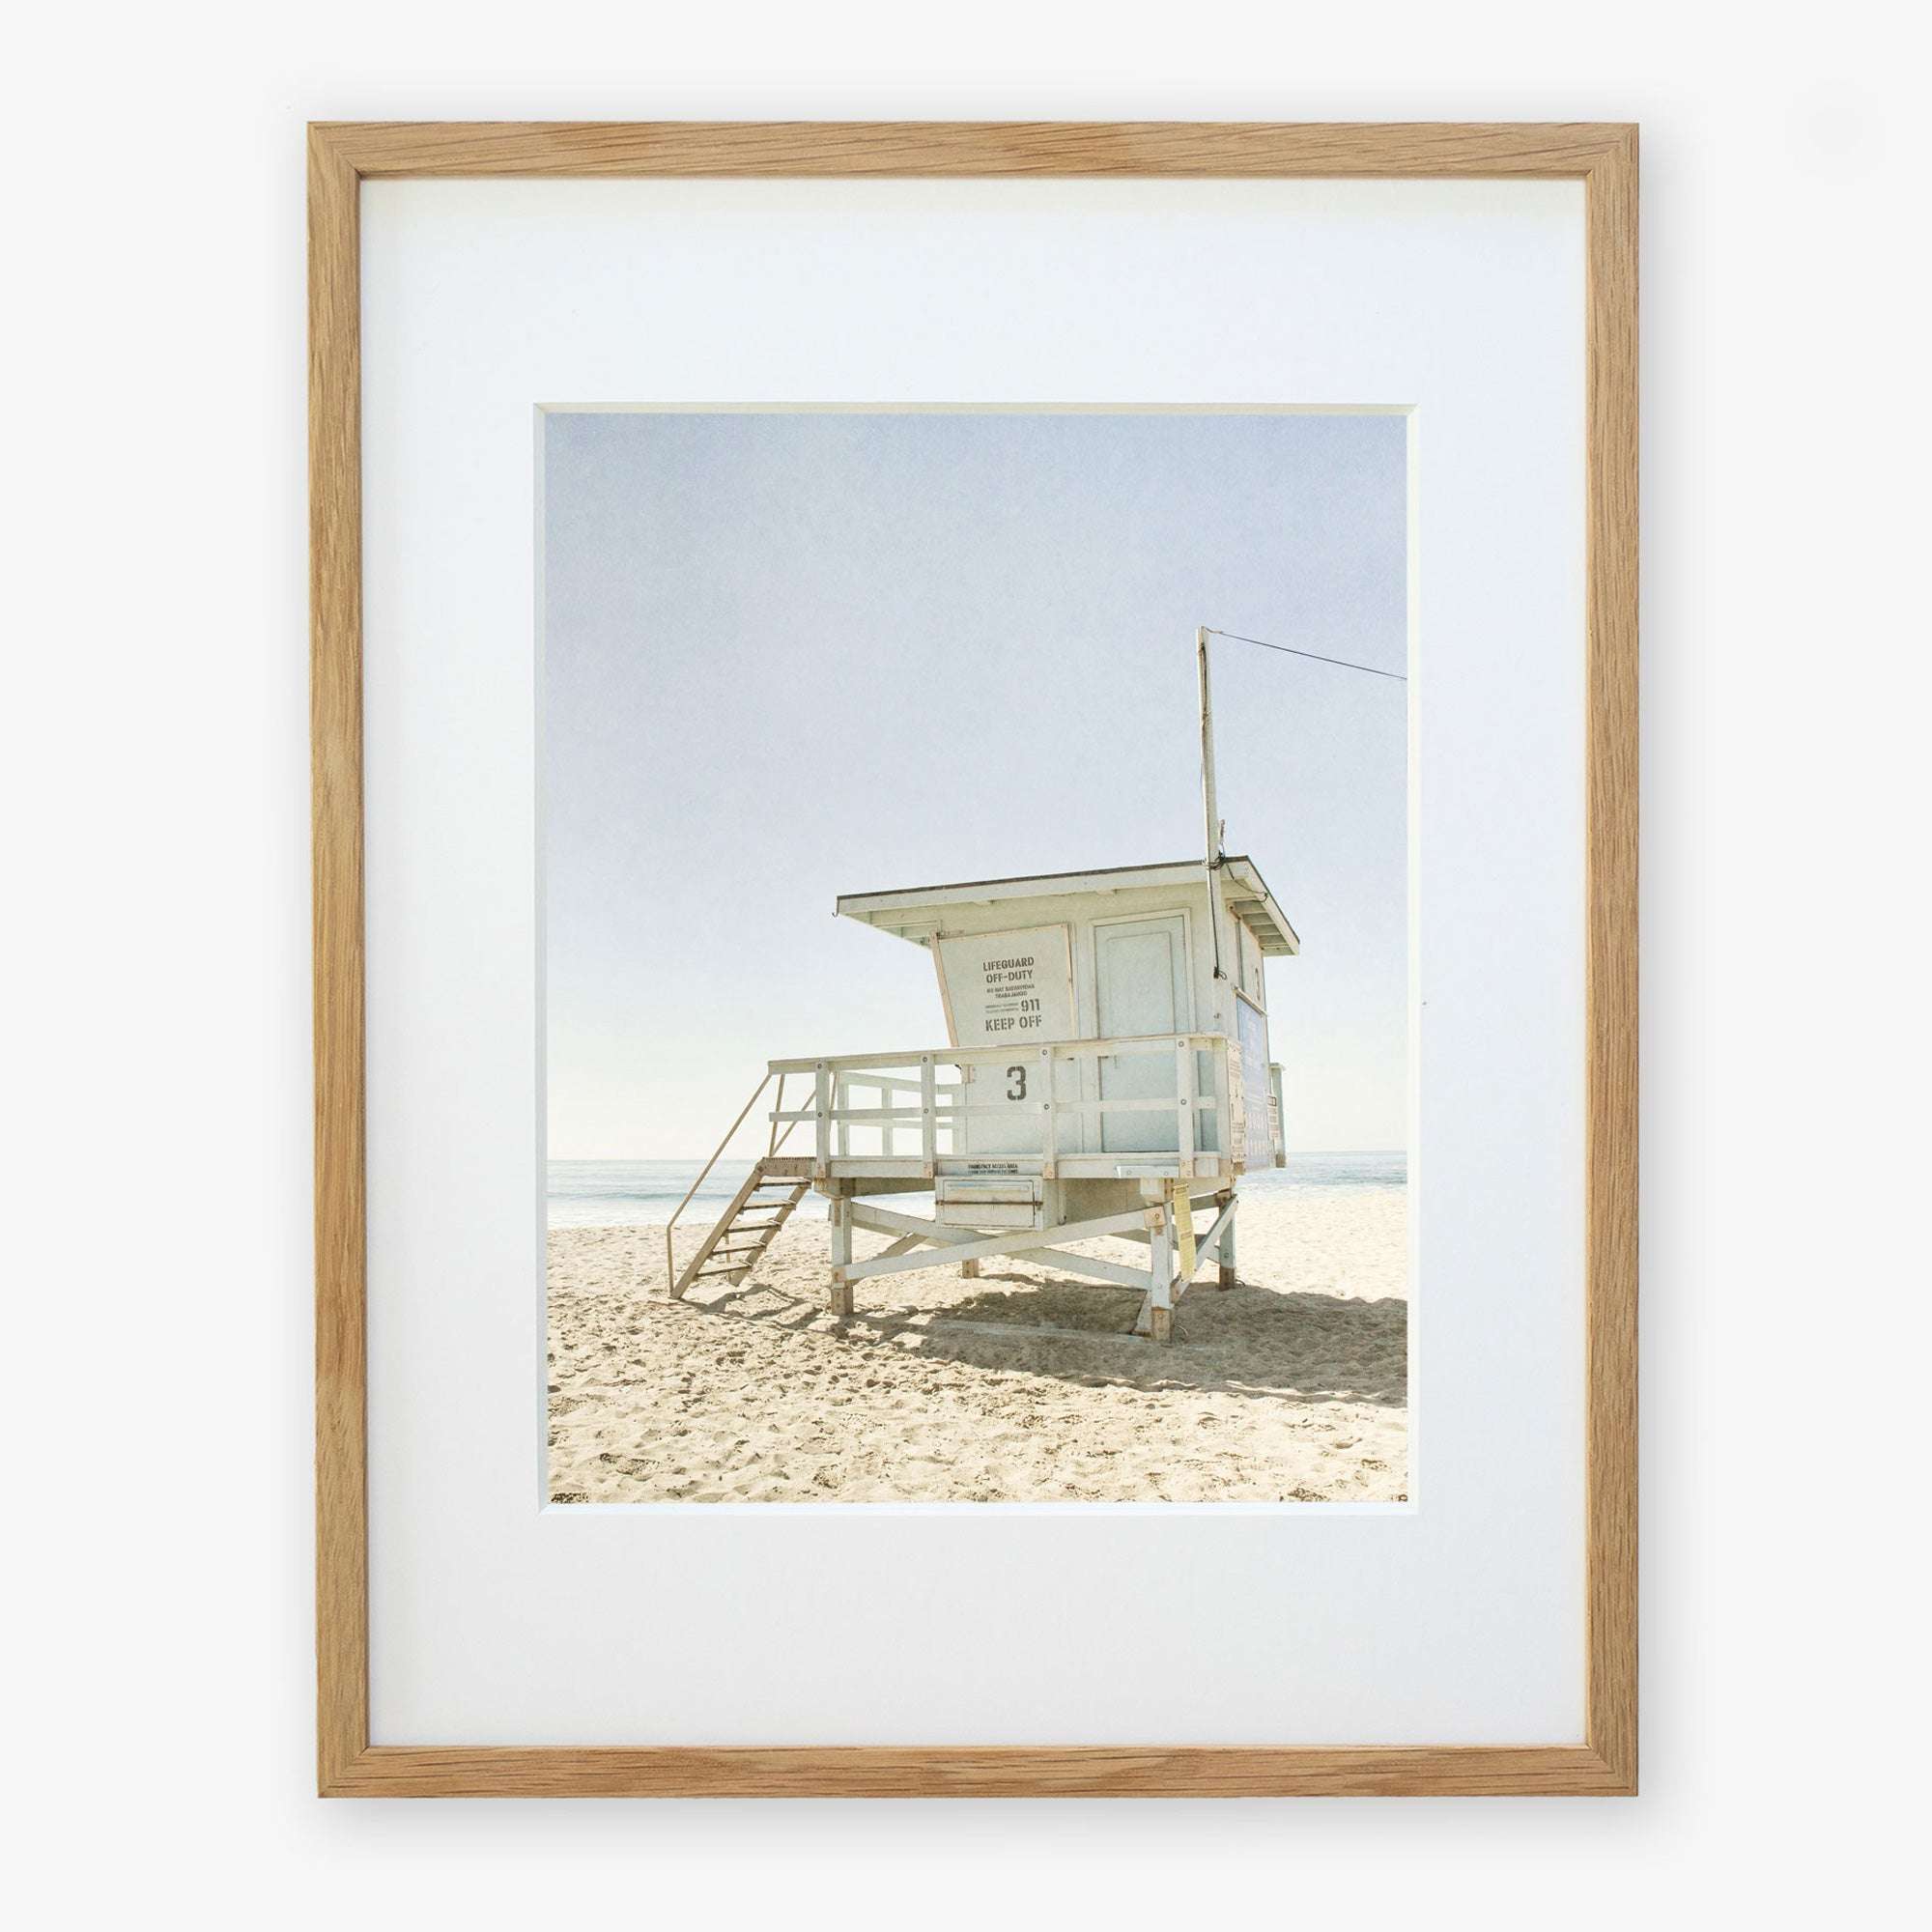 Unframed photograph of a solitary lifeguard tower on a sandy beach under a clear sky. The tower is white with steps leading up to it. California Malibu Beach Print, 'Surfrider Lifeguard' by Offley Green.